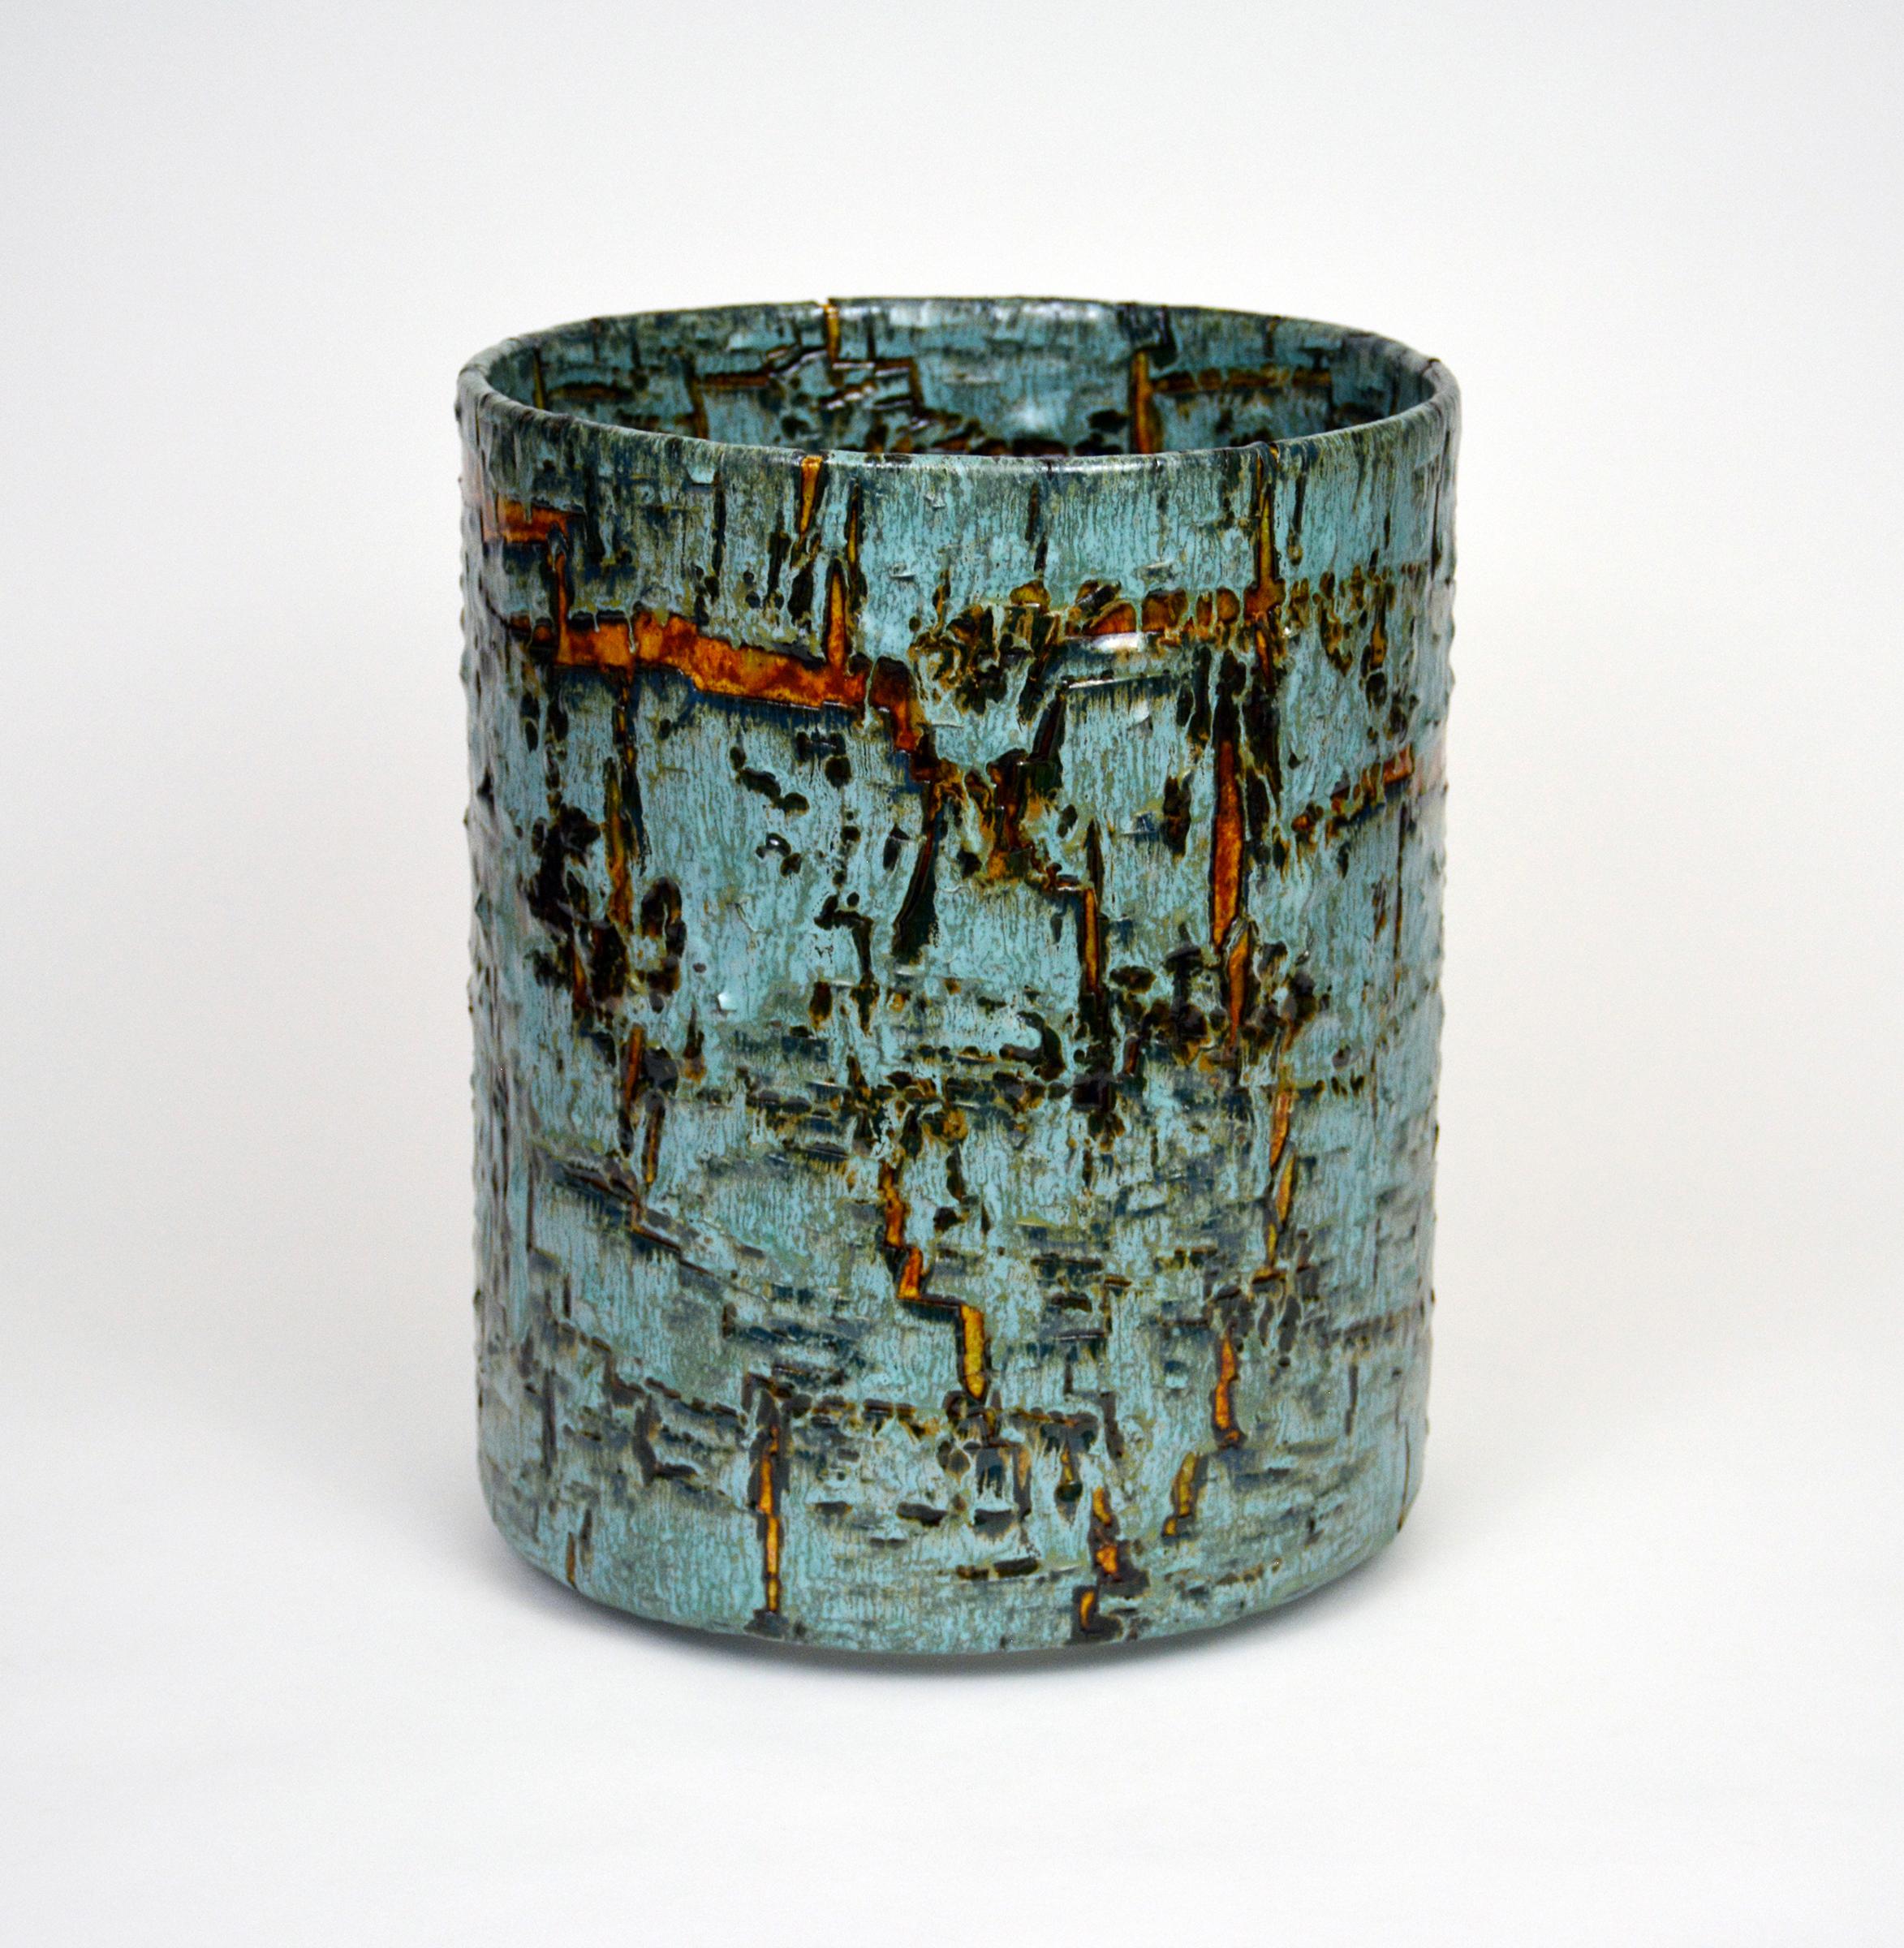 Contemporary Ceramic Vessel by William Edwards  Cylinder Sculpture  For Sale